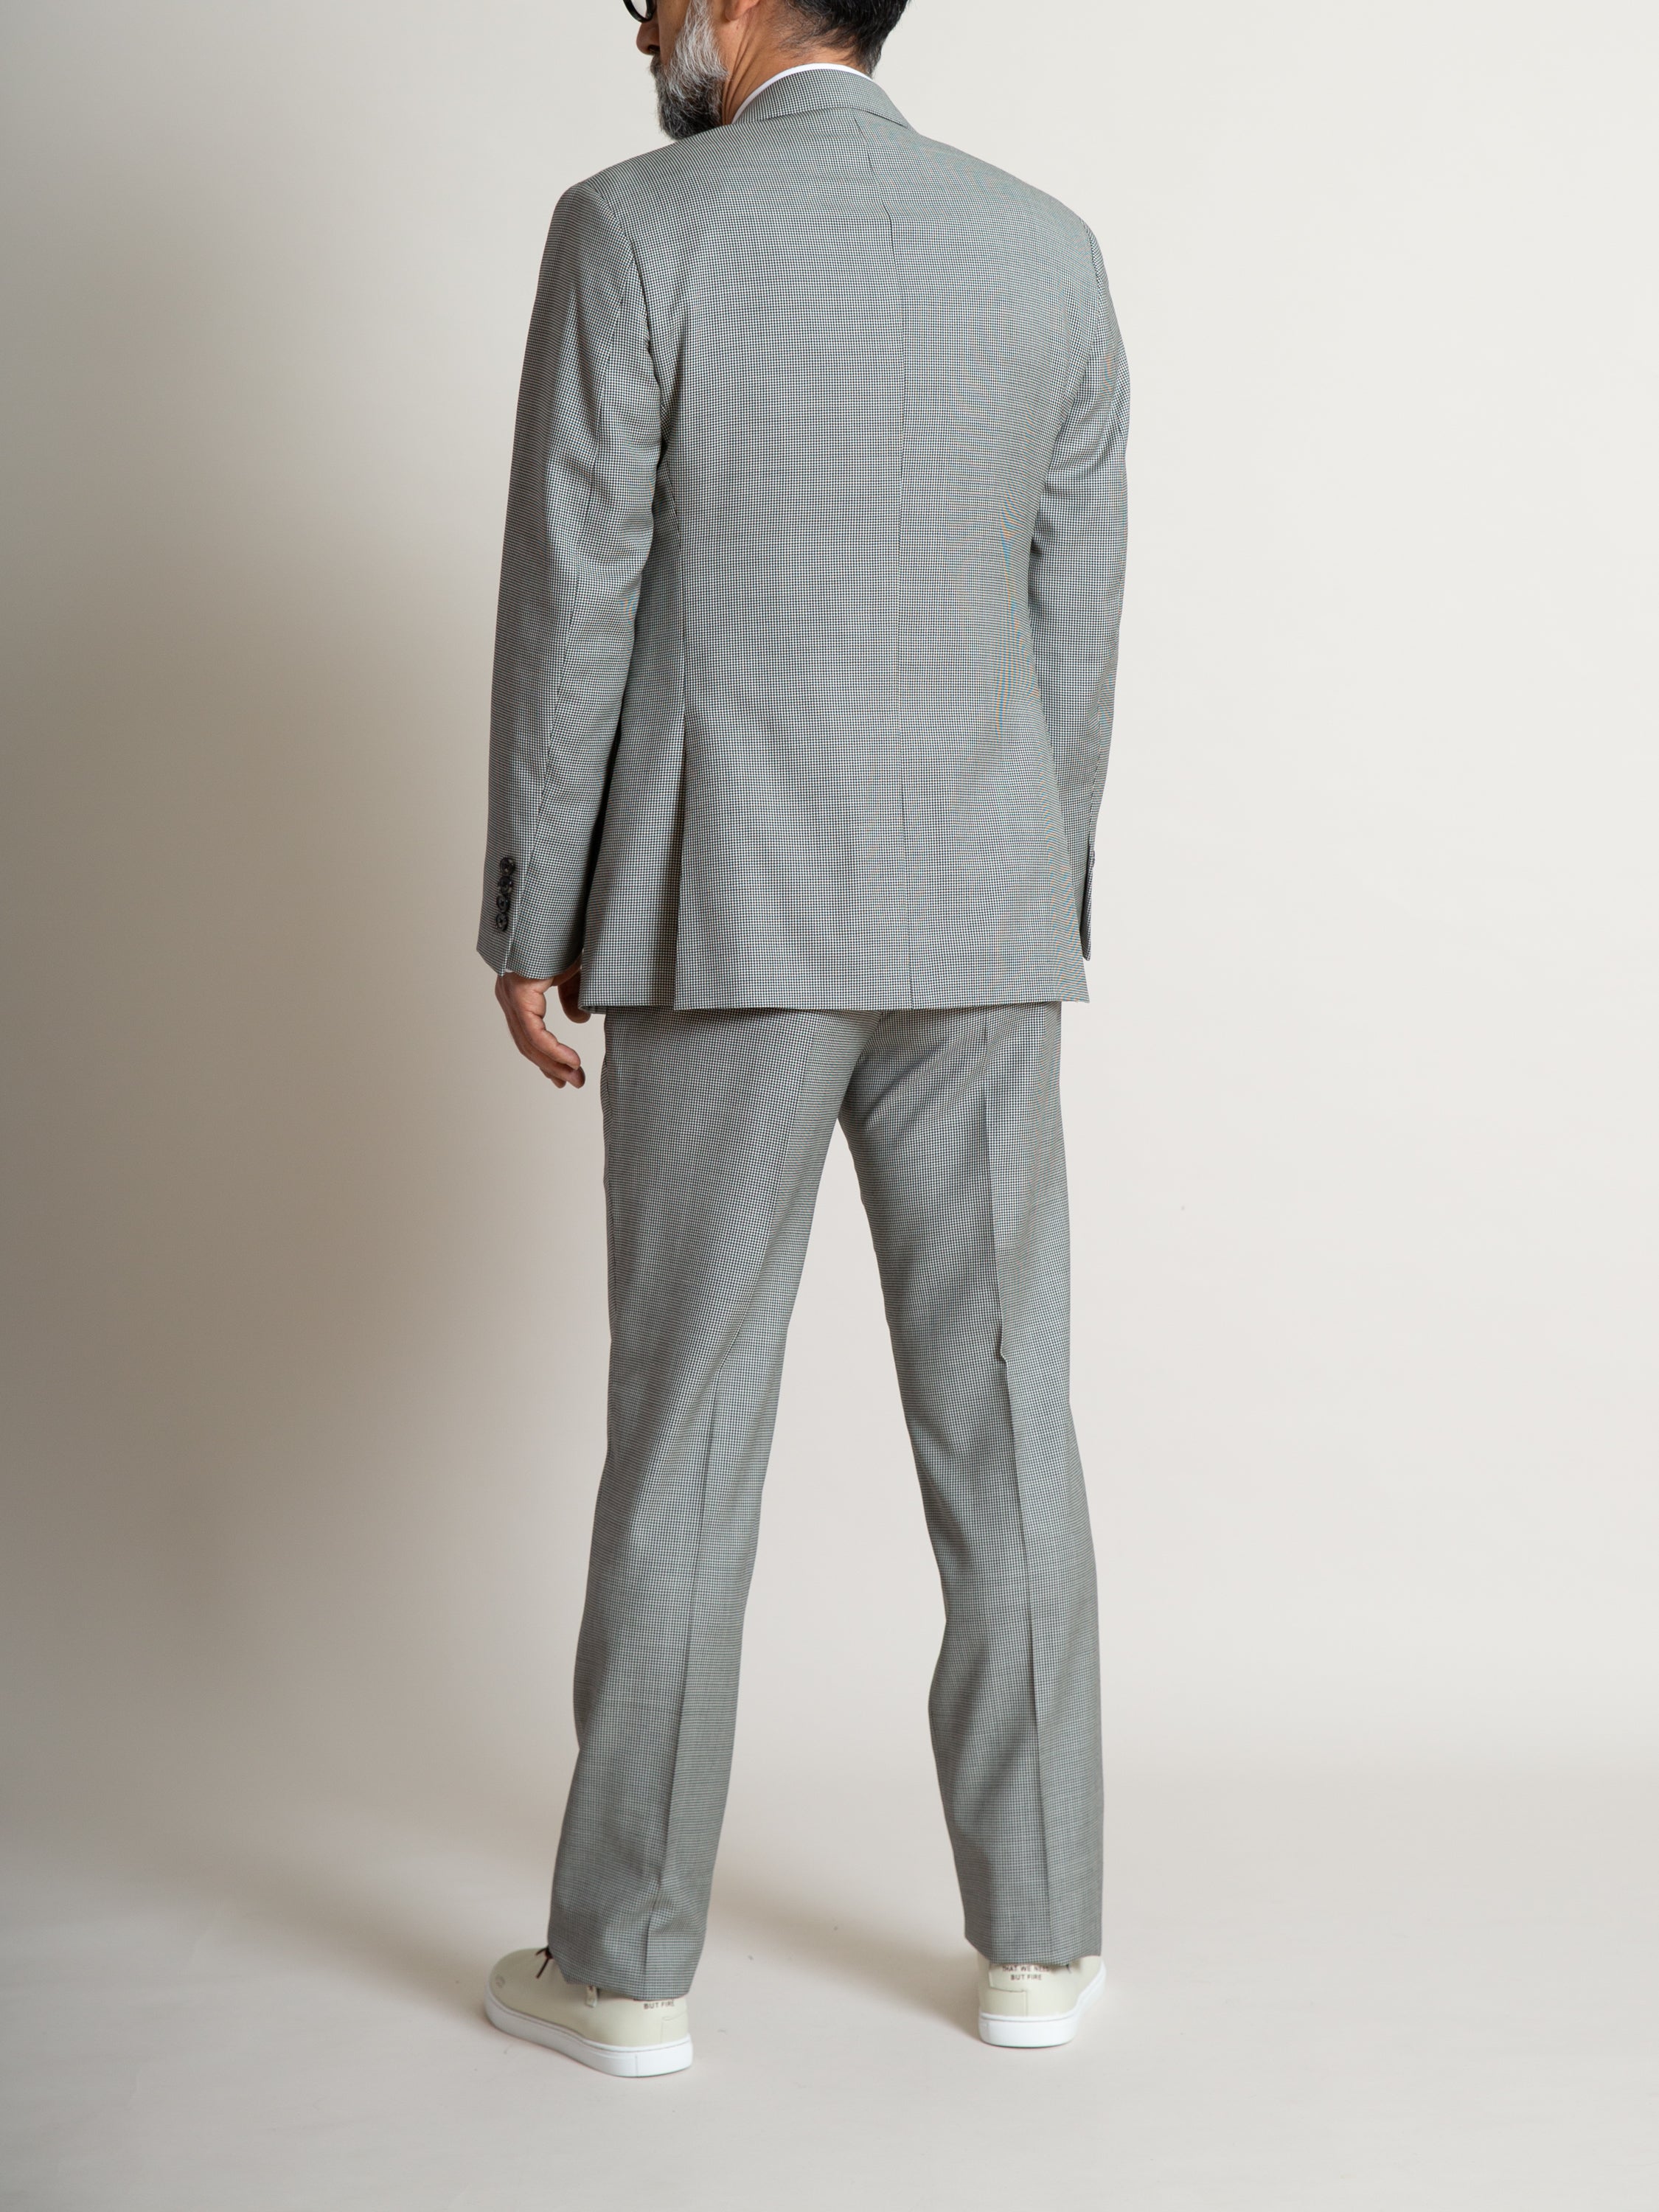 The Freeman Suit - Black and White Houndstooth